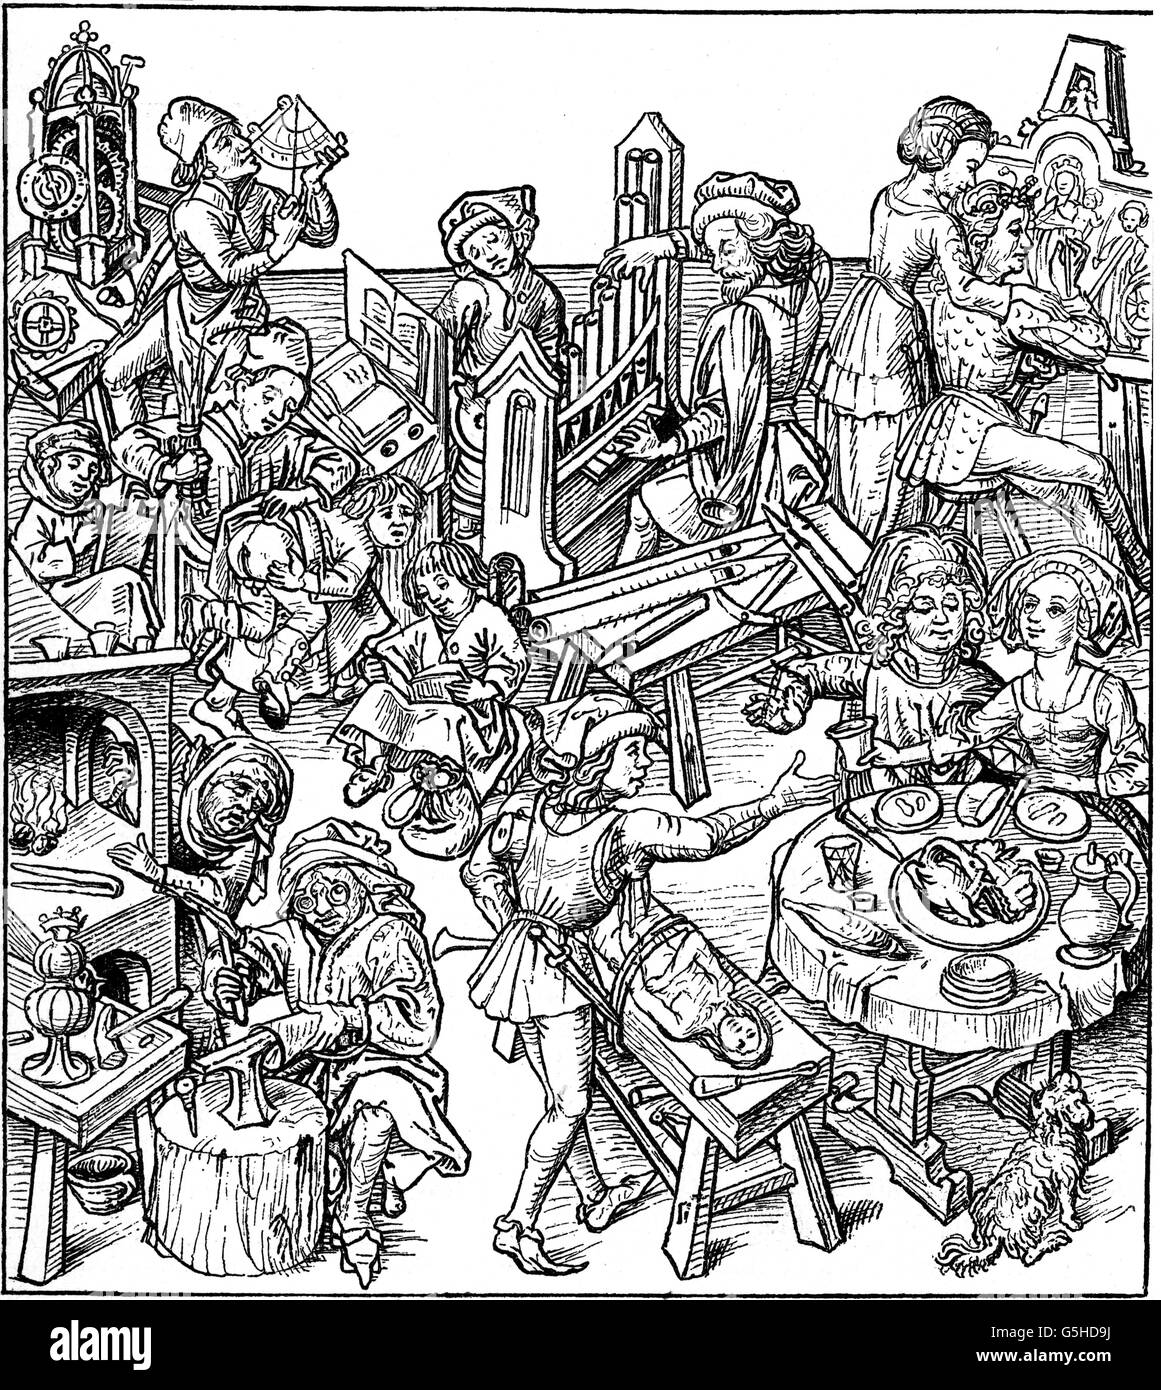 Middle Ages, people, mediaeval middle-class life, woodcut, illustration from 'Mittelalterliches Hausbuch', late 15th century, Additional-Rights-Clearences-Not Available Stock Photo